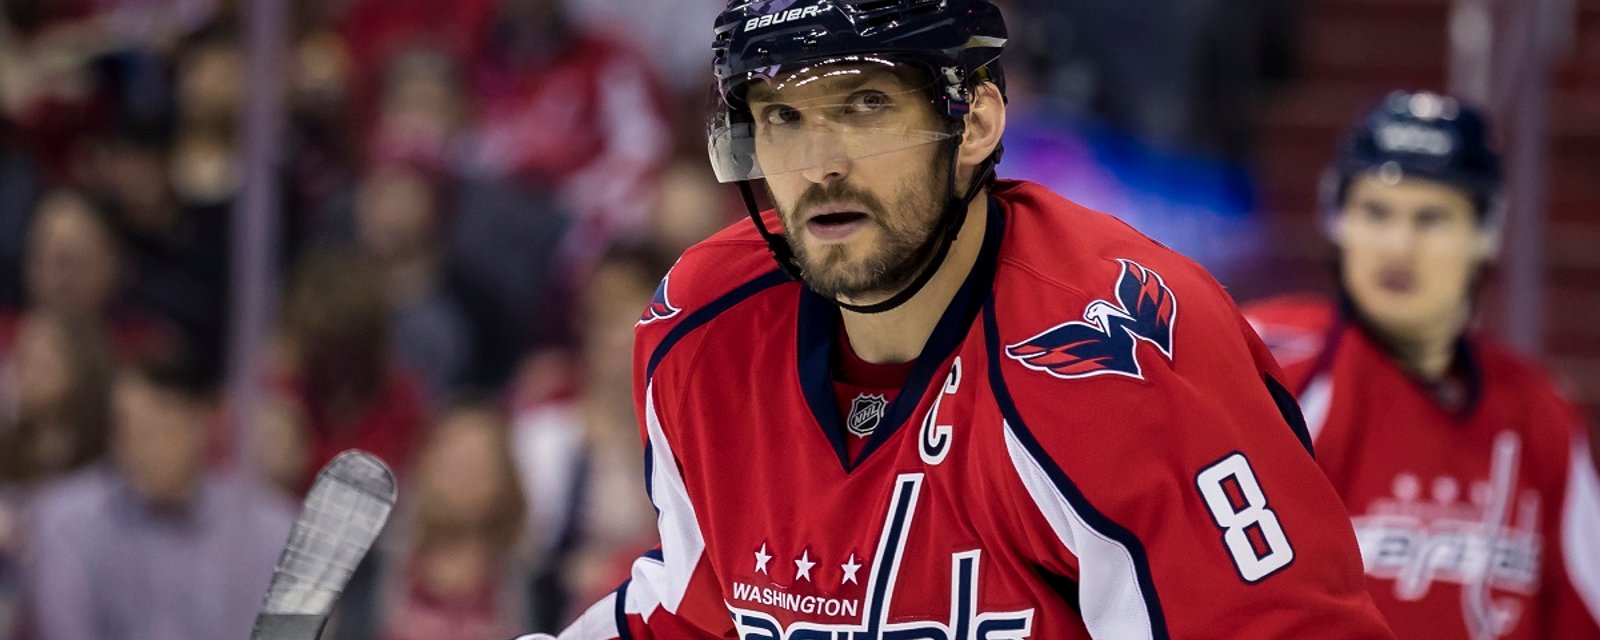 Trade talk around Alex Ovechkin continues to heat up.